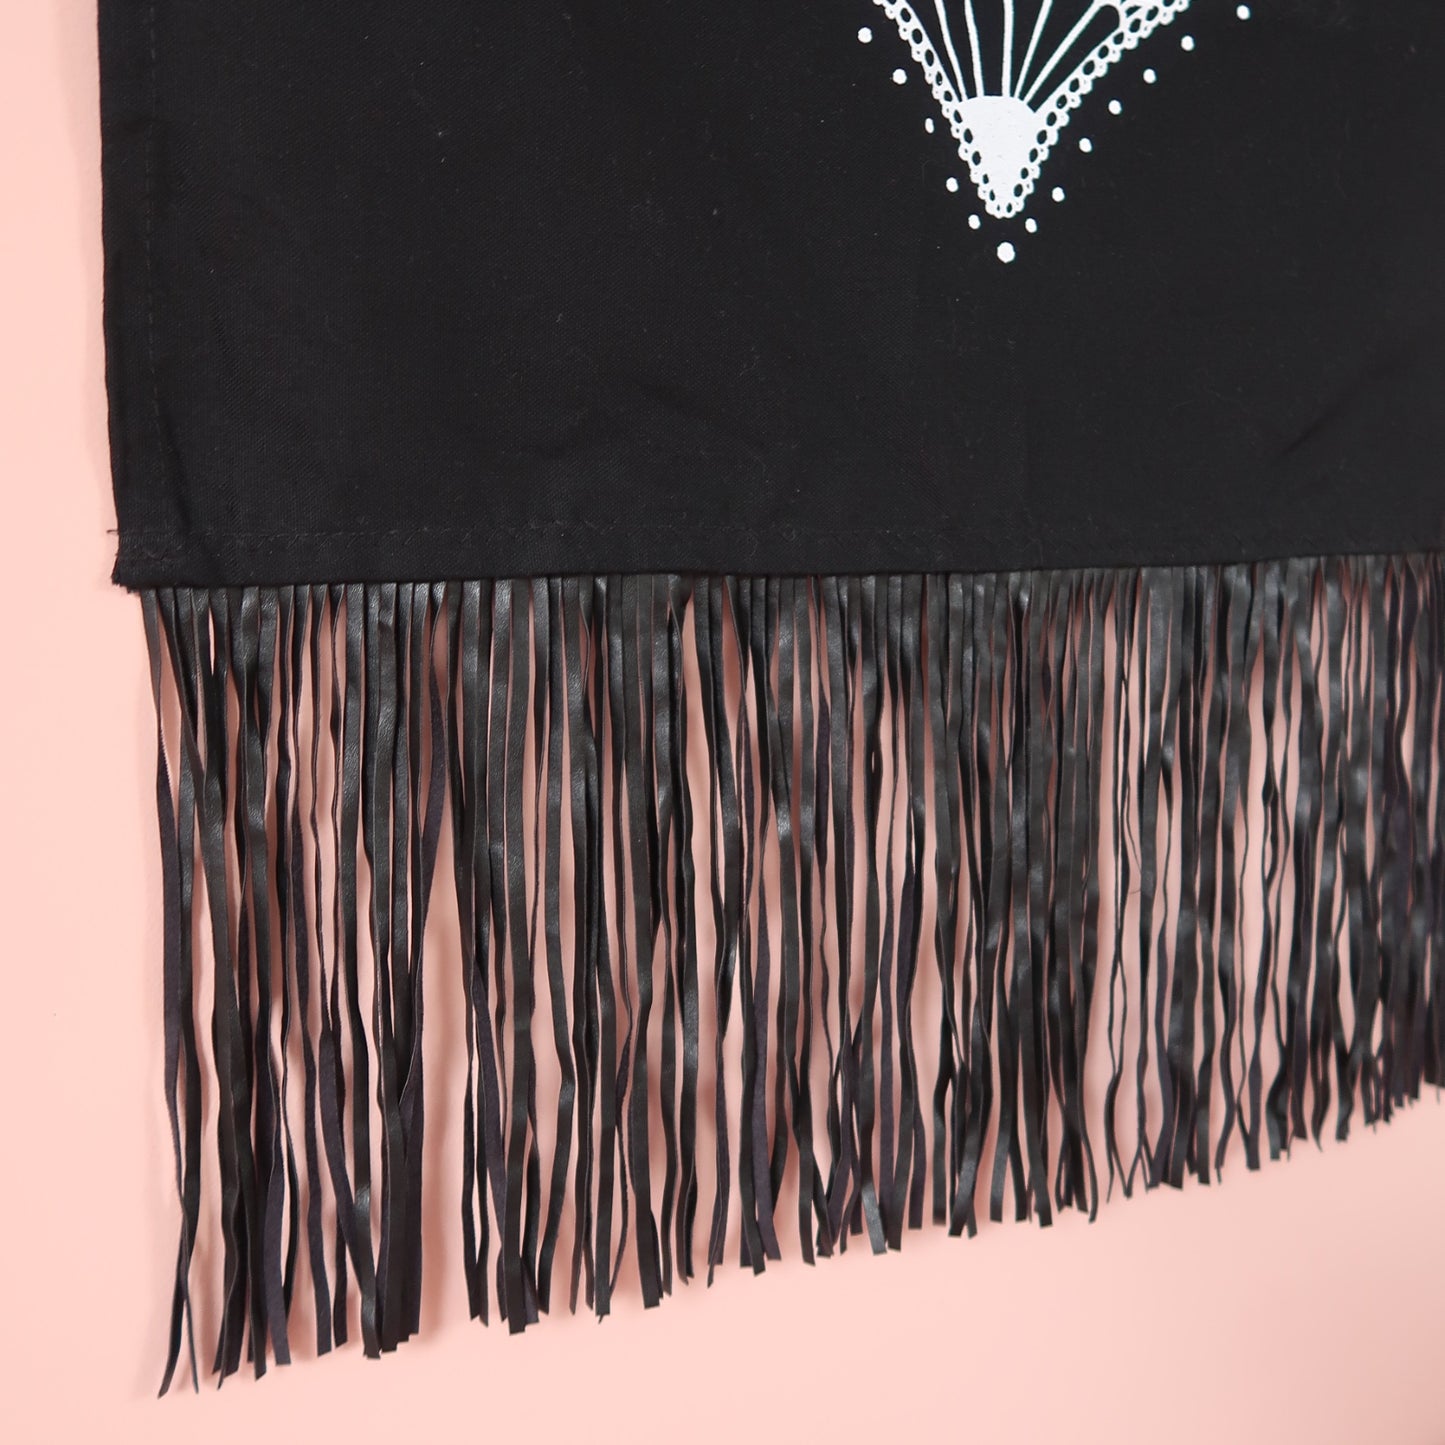 trust the timing of your life wall hanging - fringe